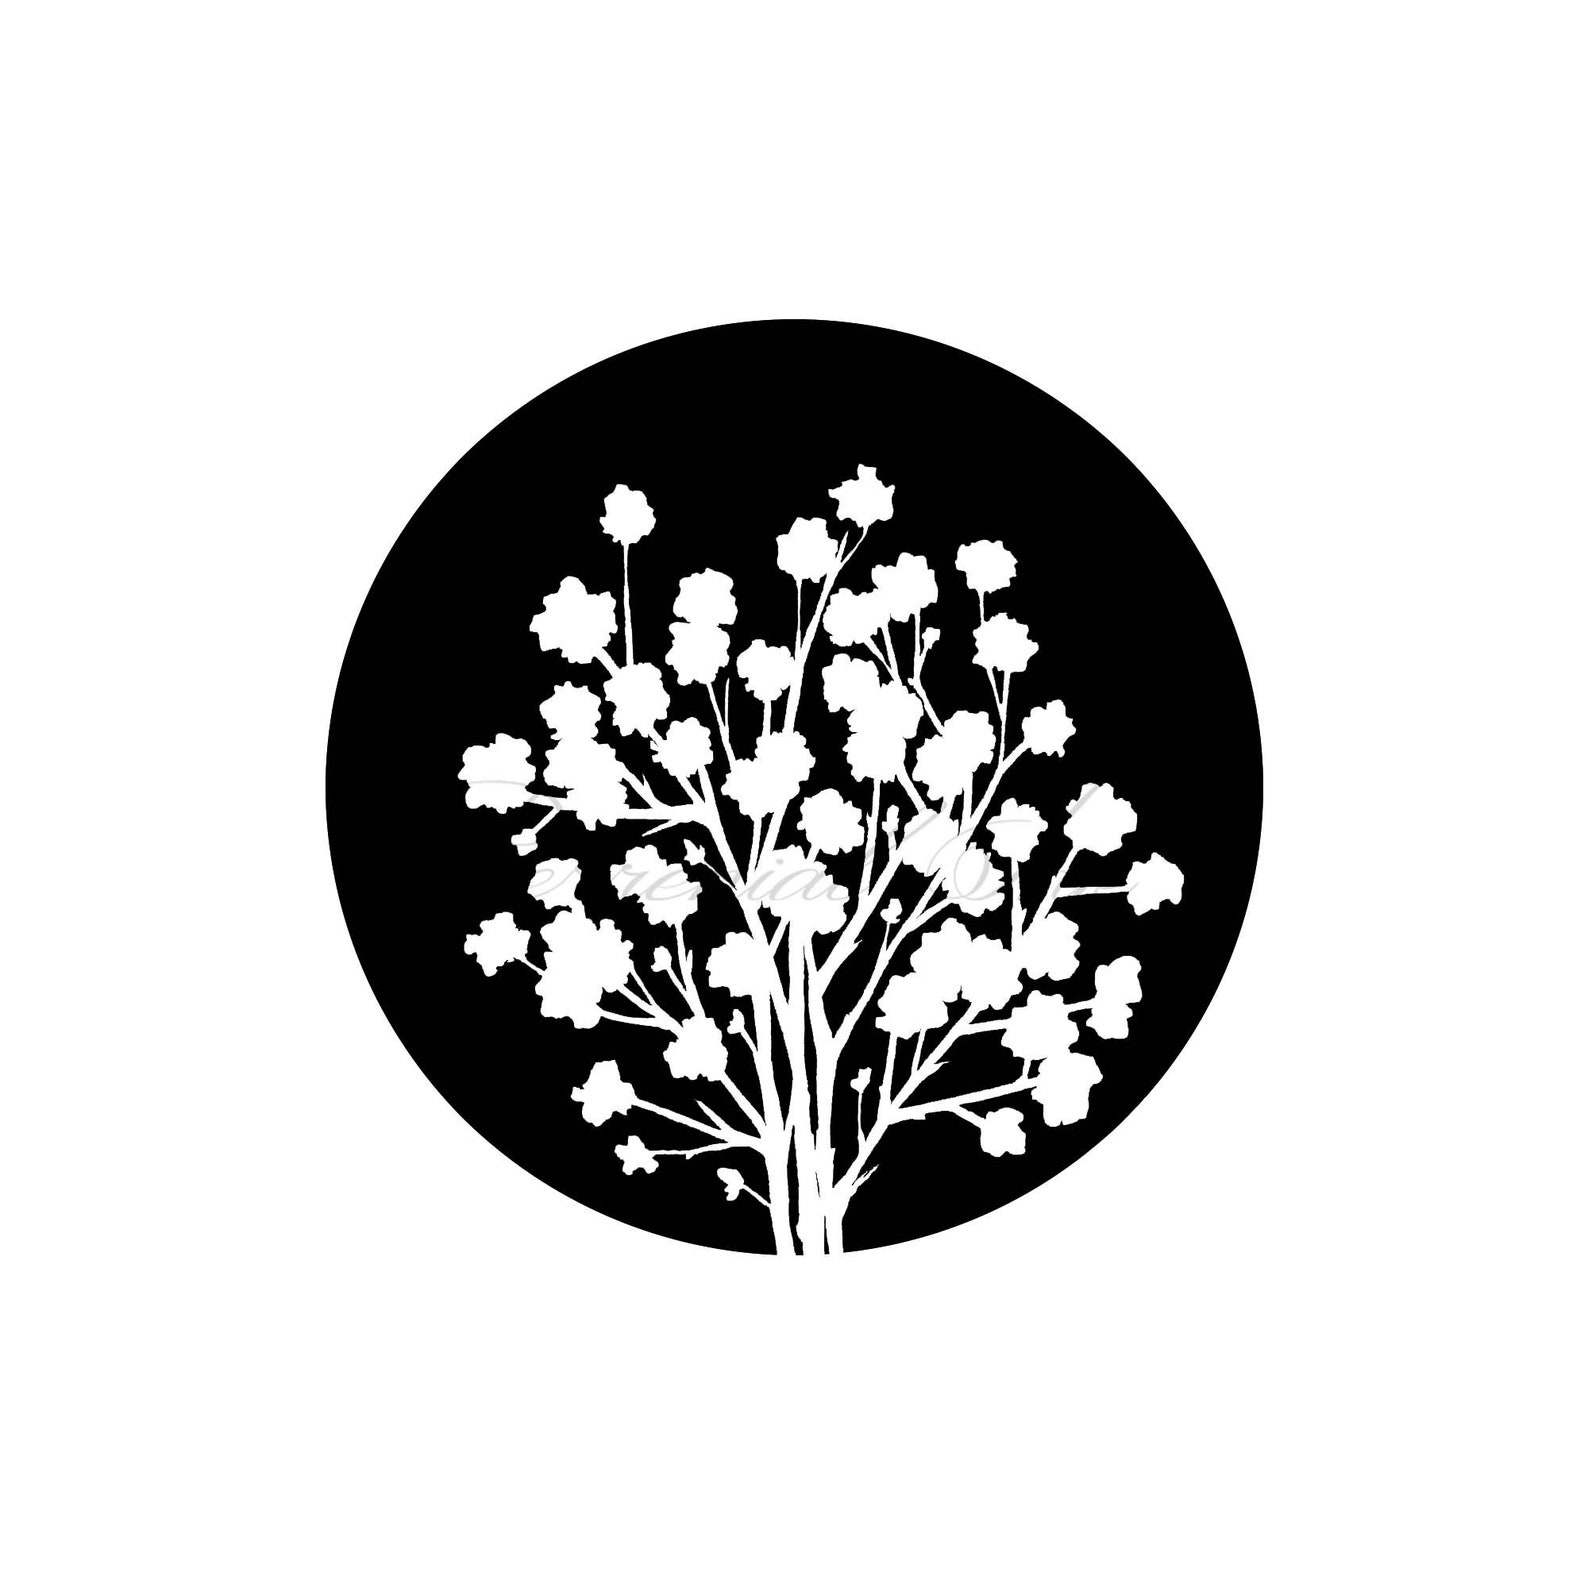 Baby's Breath Silhouette Illustration Minimal Floral | Etsy